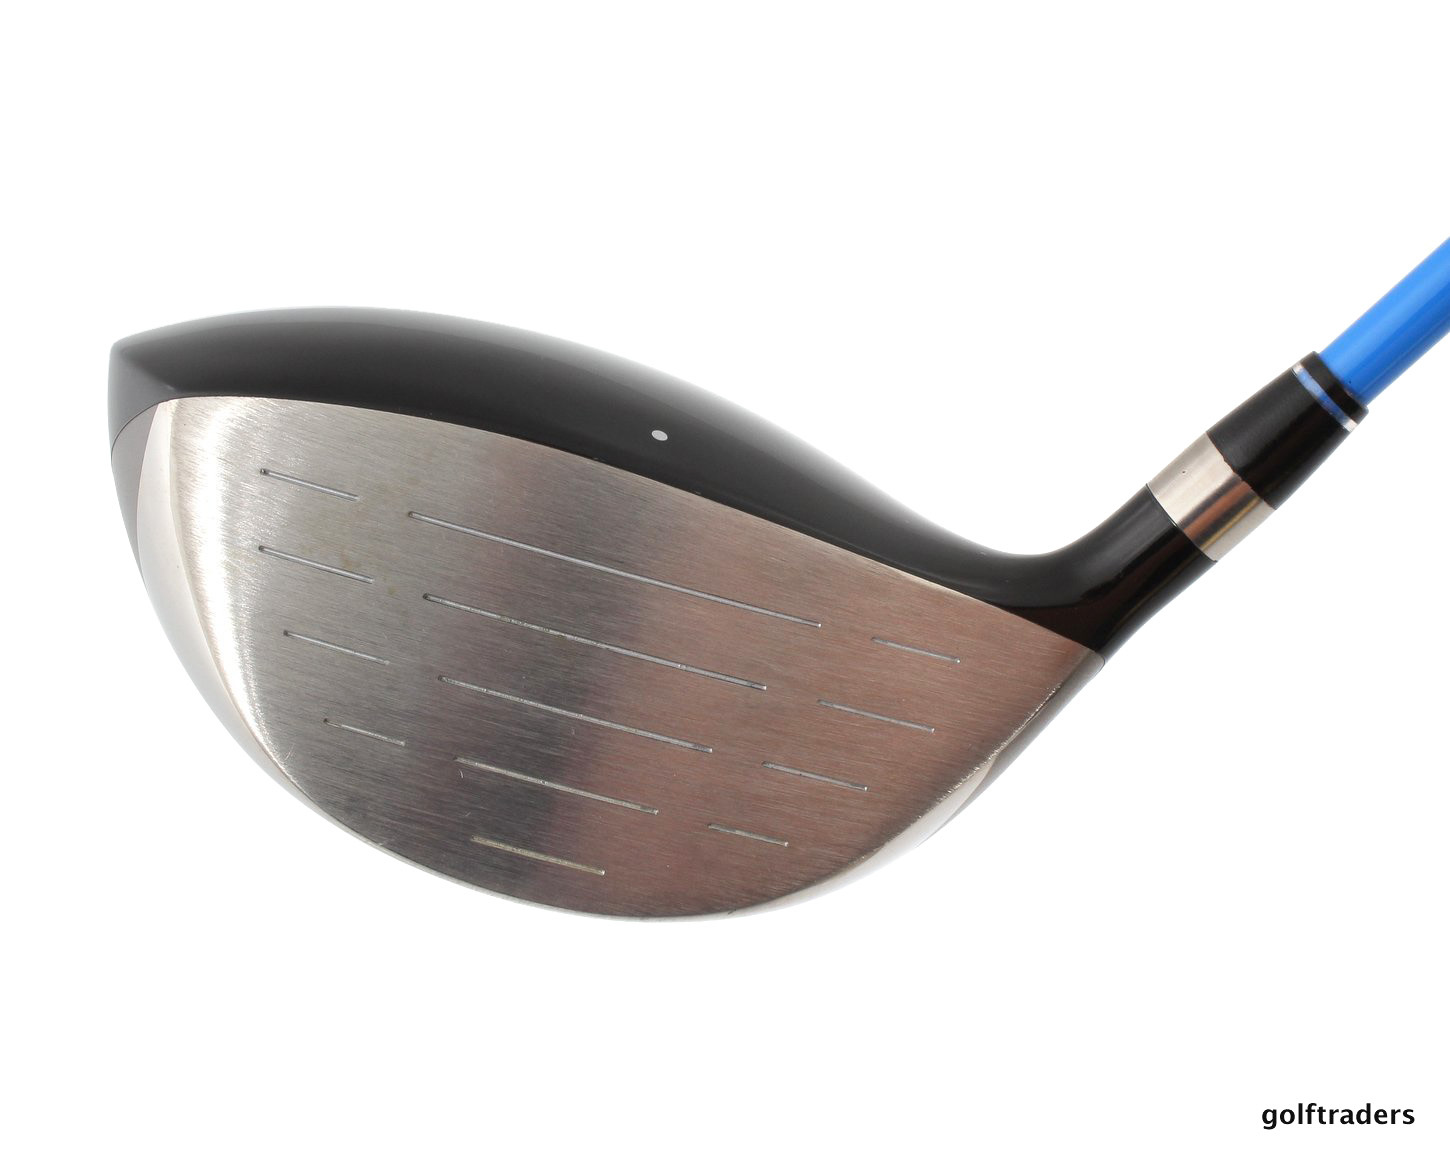 tommy armour 845 driver review